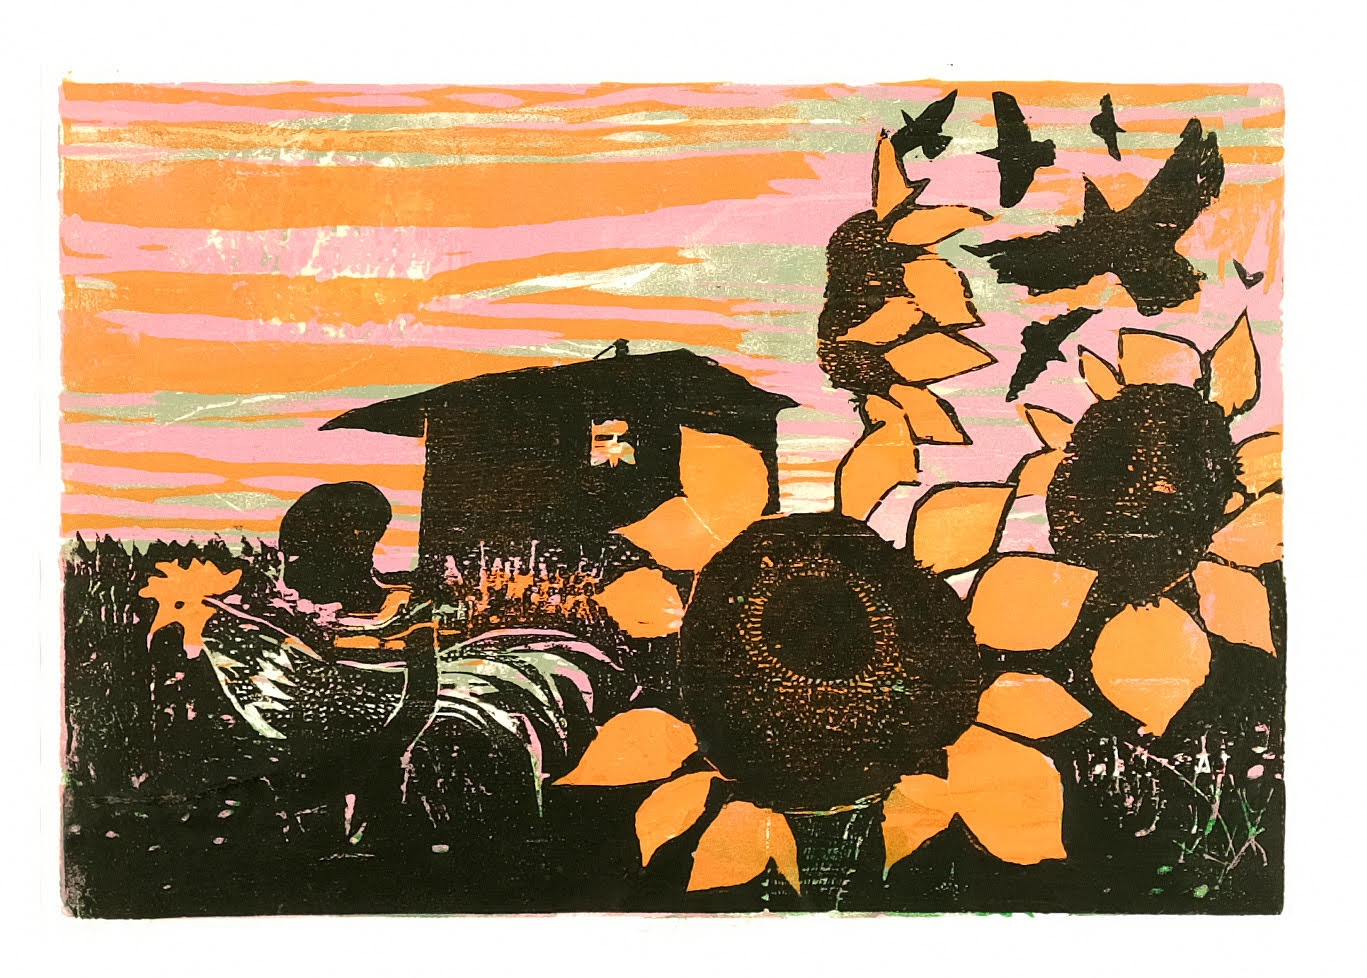 Sunflowers #2, 1966, color woodcut, 13 &frac12; x 20 inches